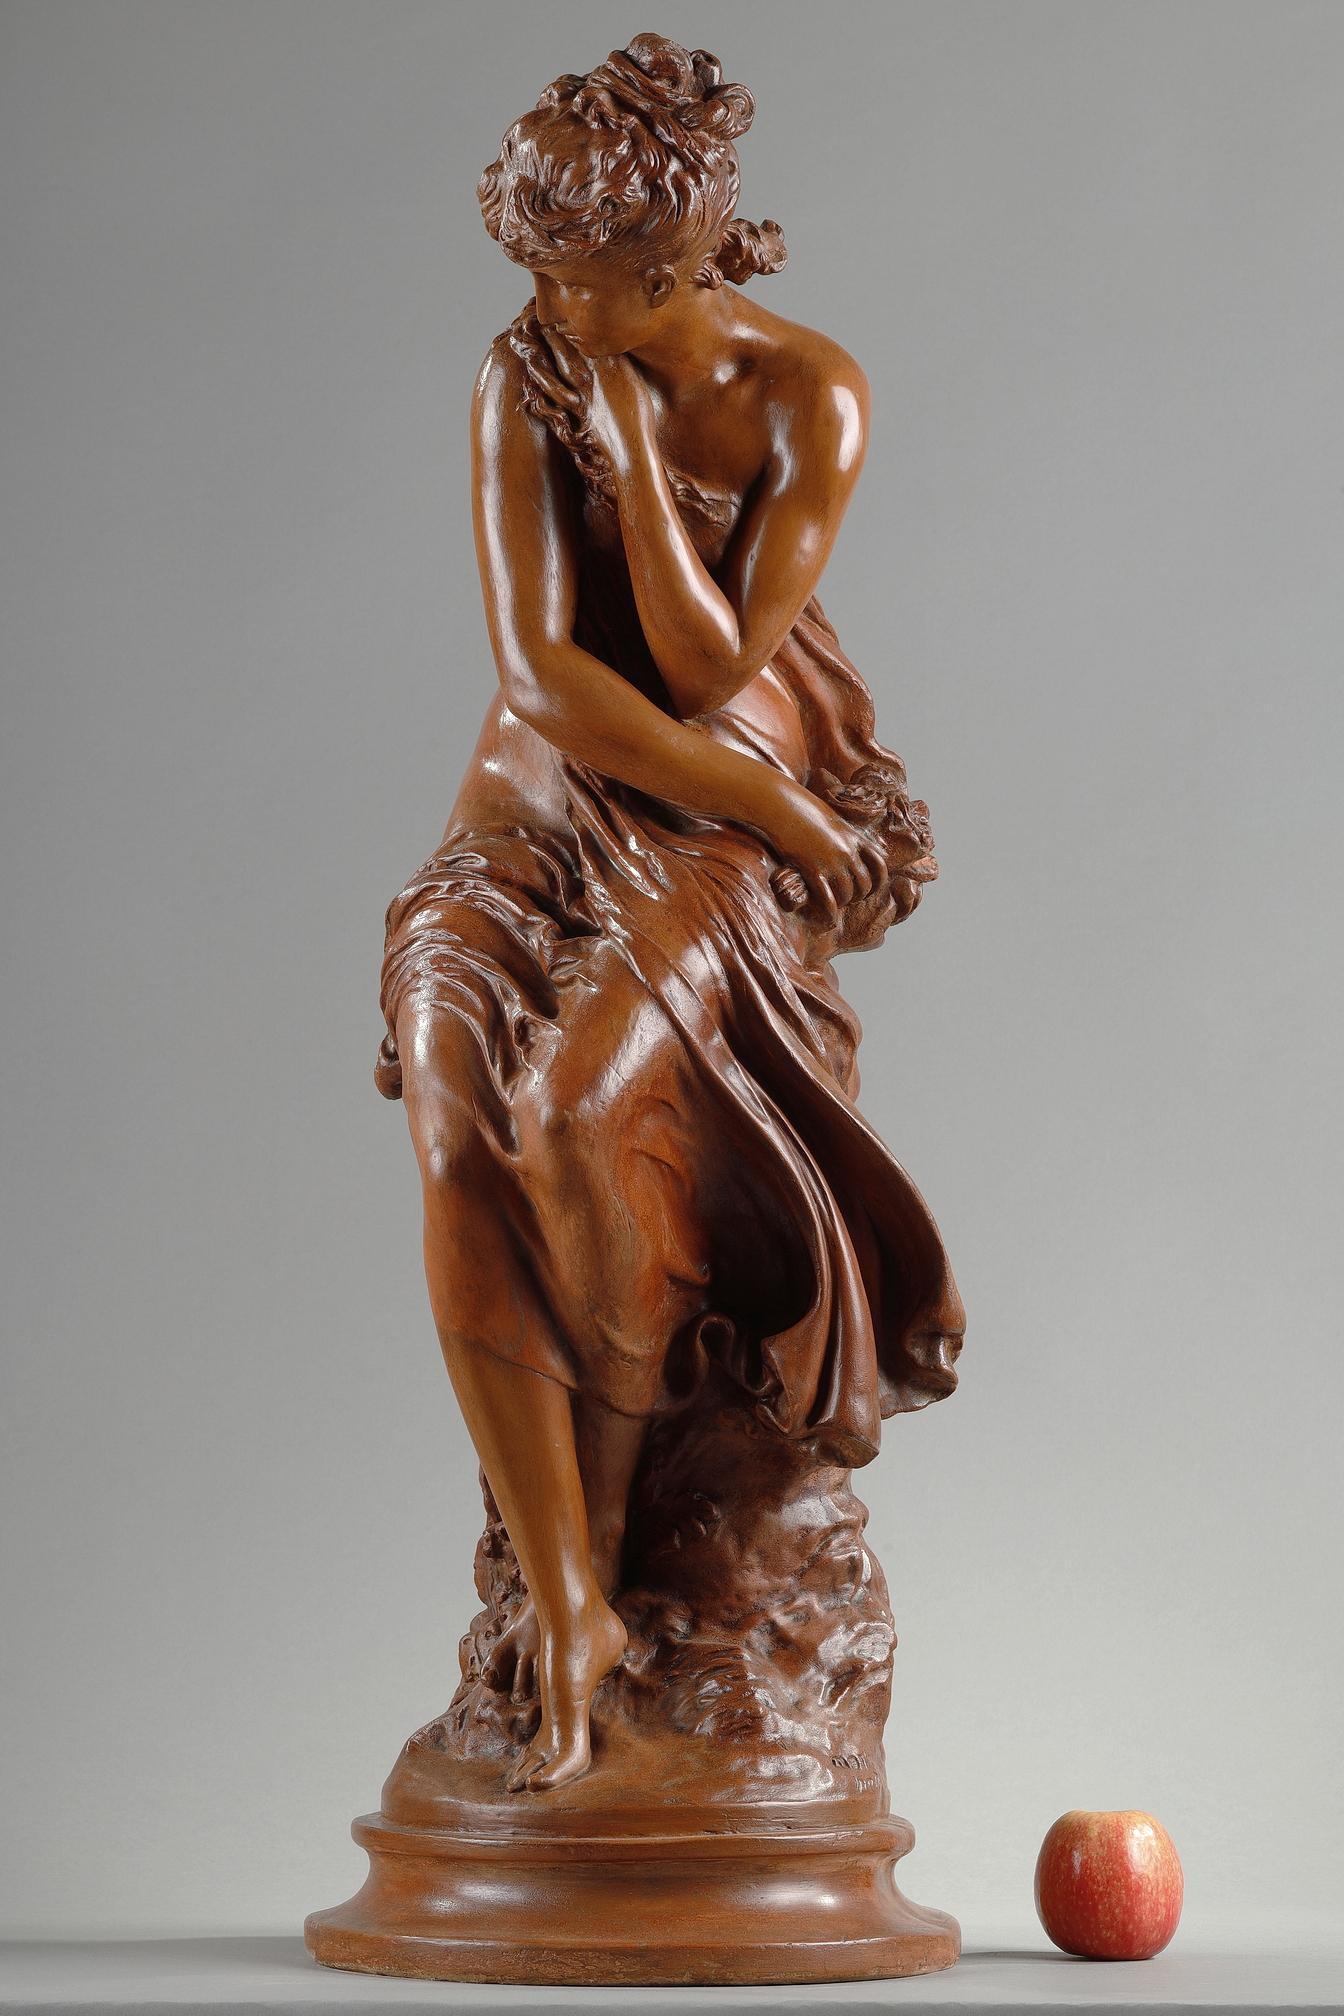 Very large and beautiful terracotta sculpture by Mathurin Moreau (1822-1912) depicting 